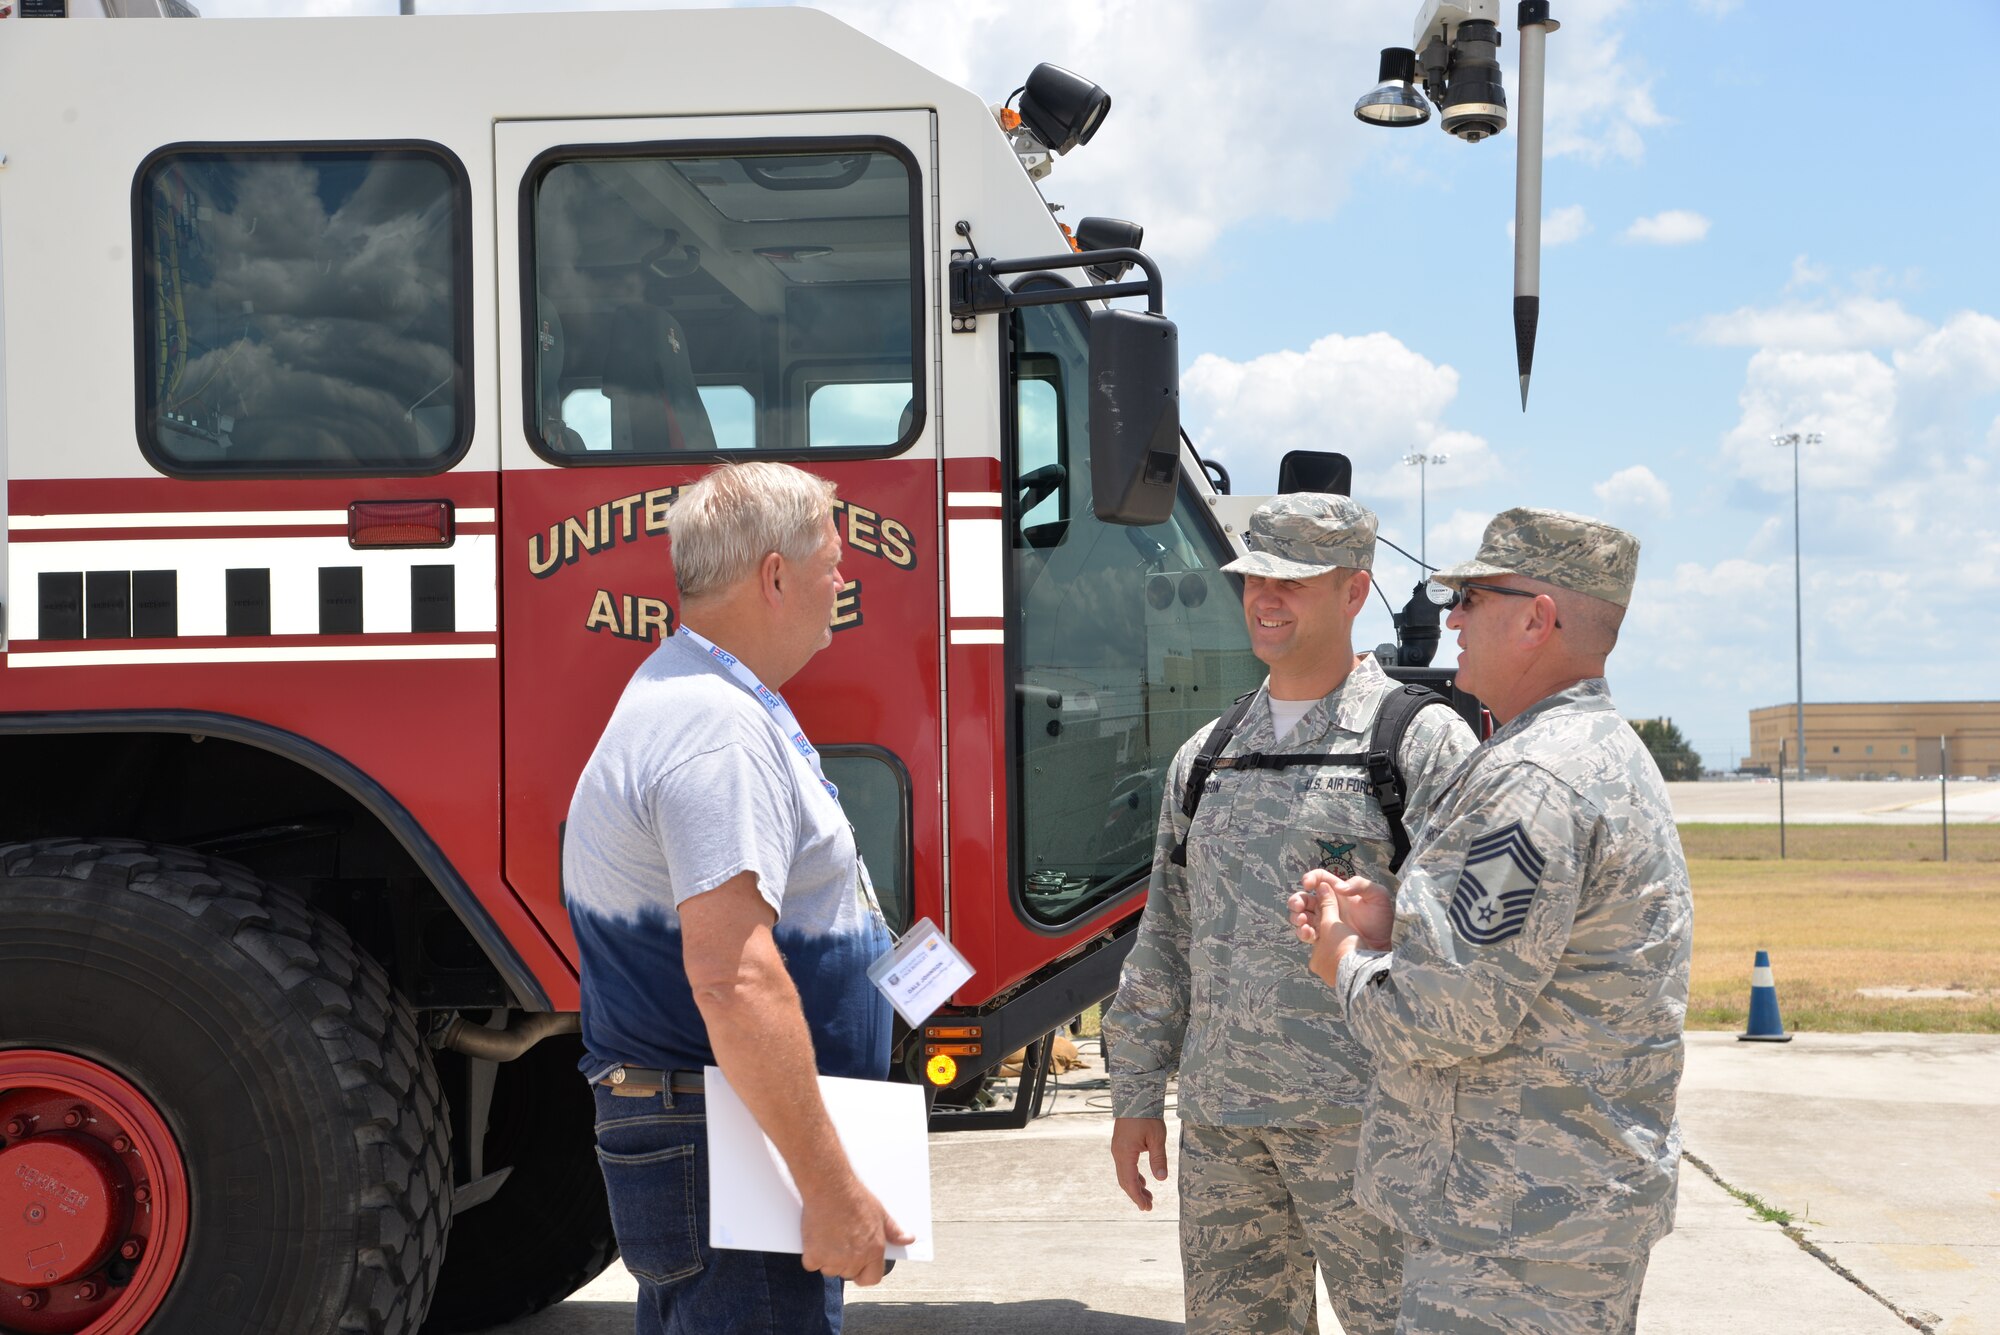 Dale Johnson, DLJ Commercial Roofing owner, talks with Master Sgt. Stephen M. Johnson, 433rd Civil Engineering Squadron assistant fire chief, and Chief Master Sgt. Robert M. Clarkin, 433rd Civil Engineering Squadron fire chief, about firefighting with an Oshkosh Striker aircraft rescue and firefighting vehicle at Joint Base San Antonio-Lackland, Texas Aug. 4, 2018. (U.S. Air Force photo by Master Sgt. Kristian Carter